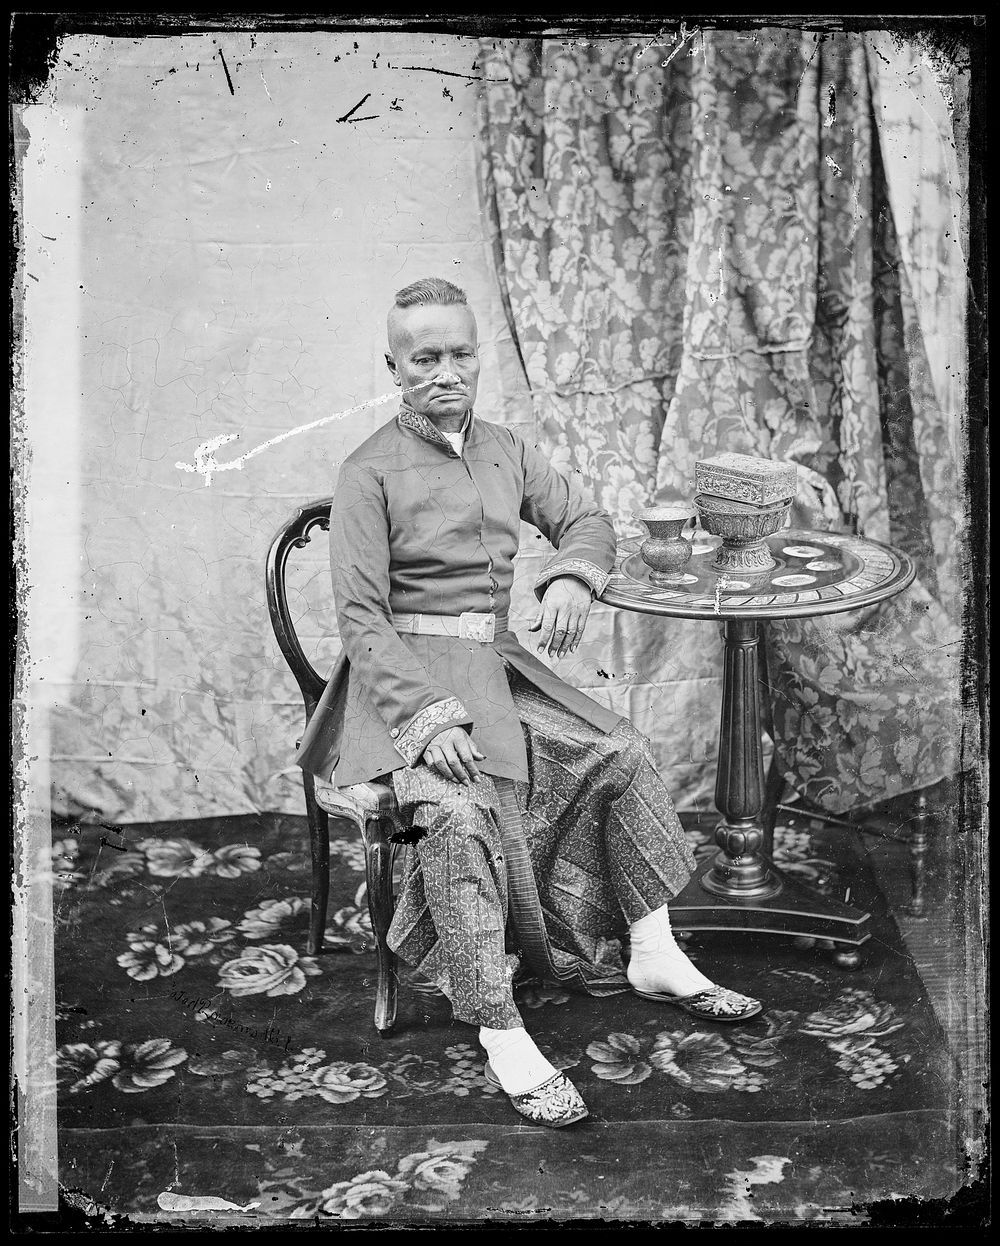 The Prime Minister (Kralahom) of Siam (Thailand). Photograph by John Thomson, 1865.